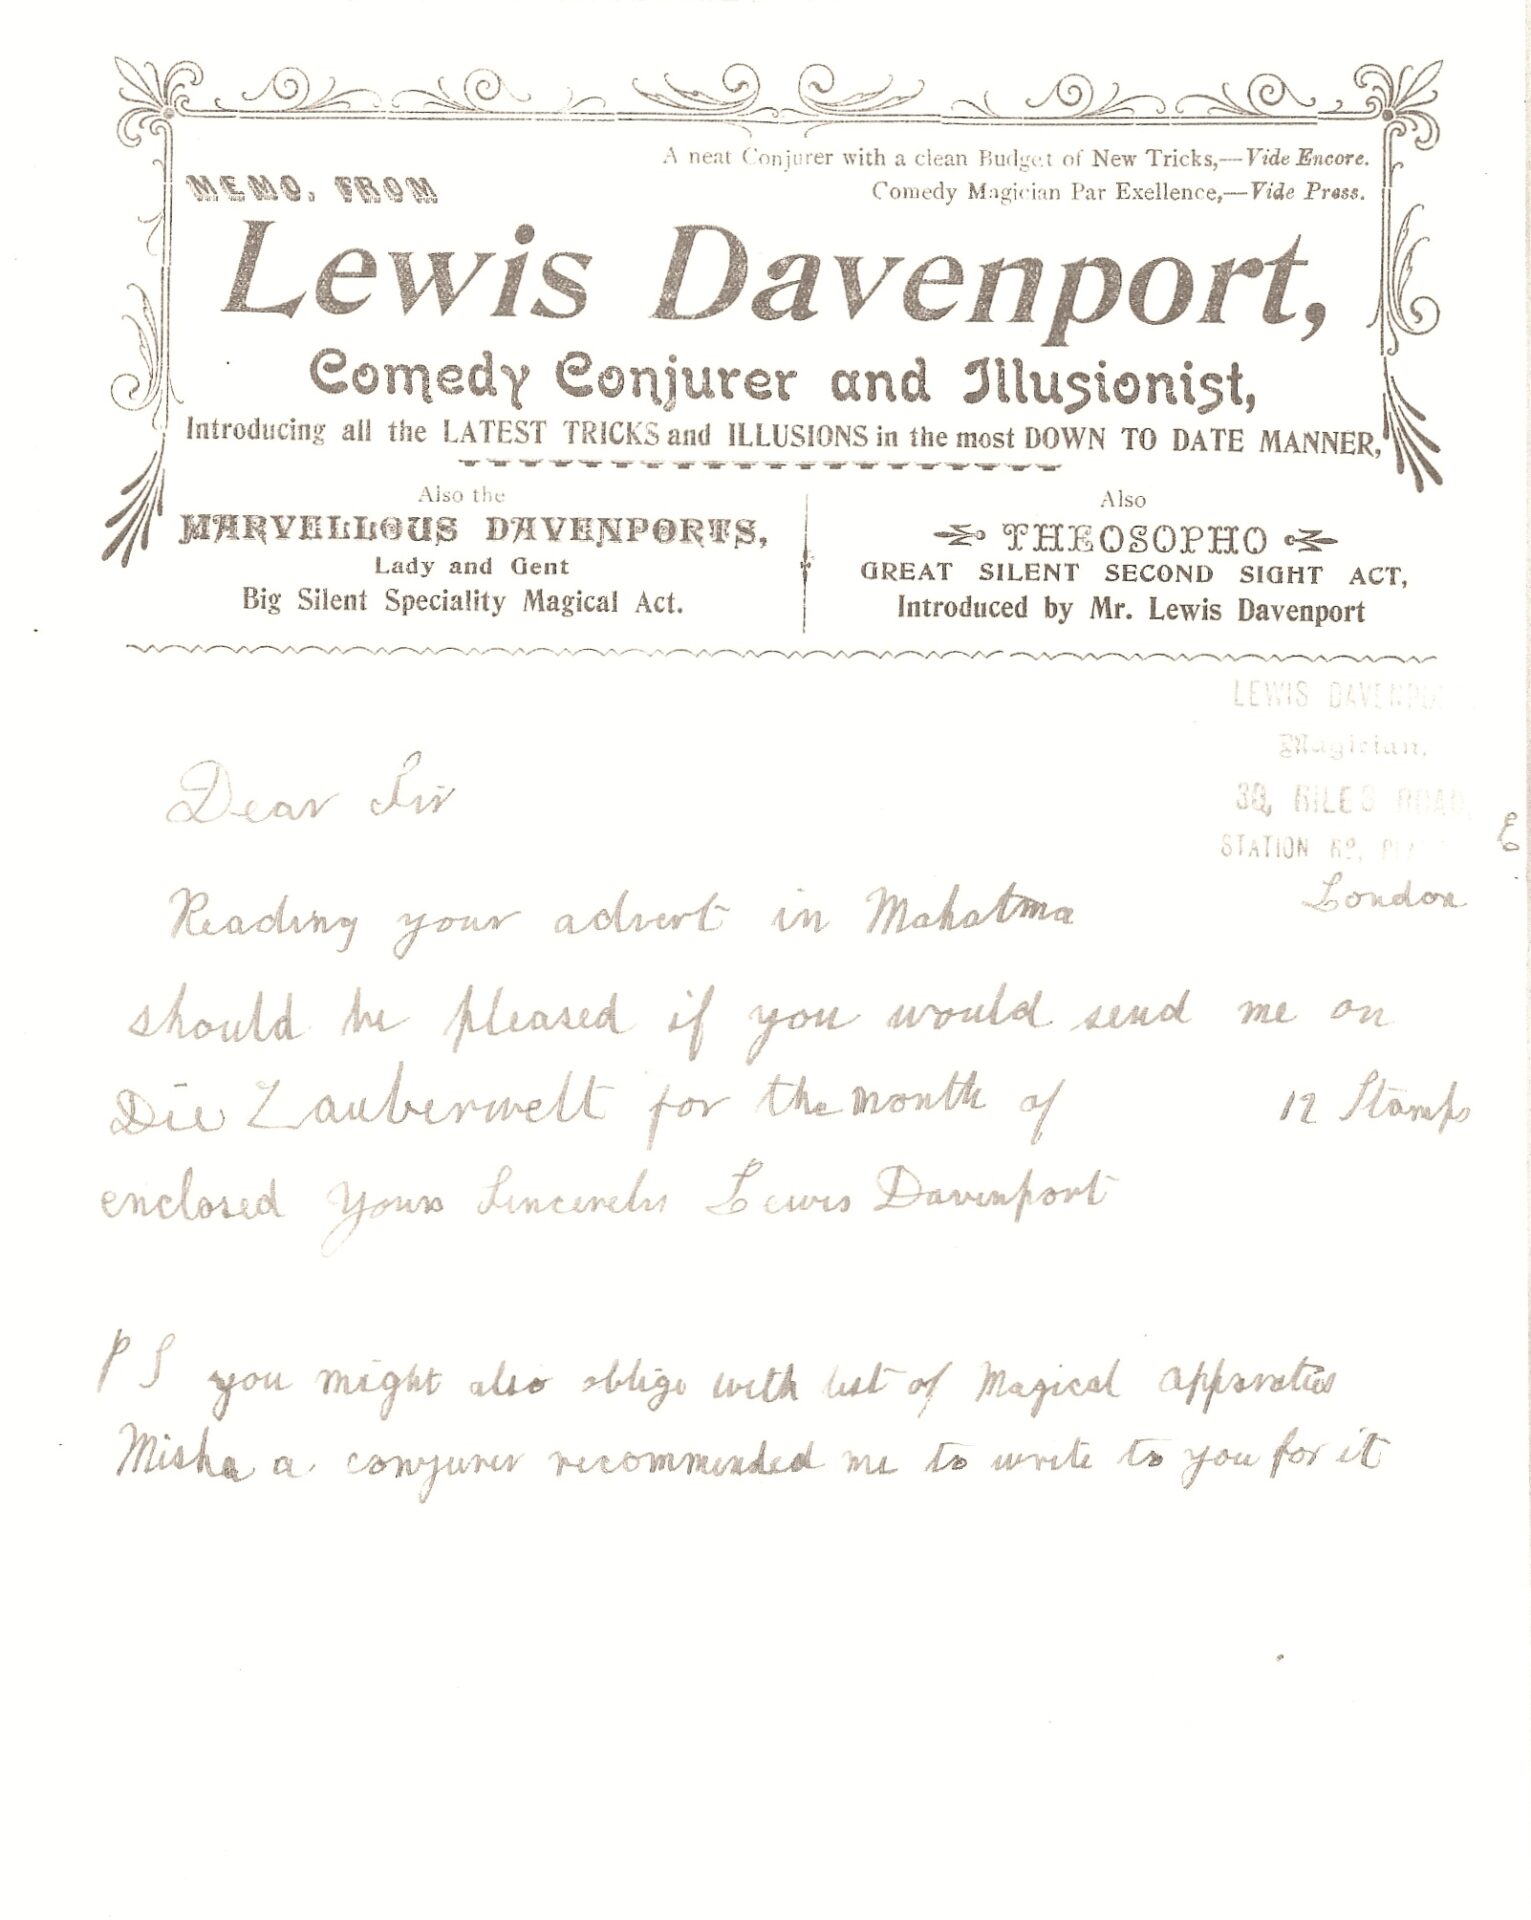 Notepaper used by Lewis Davenport which also covers The Davenports and Theosopho